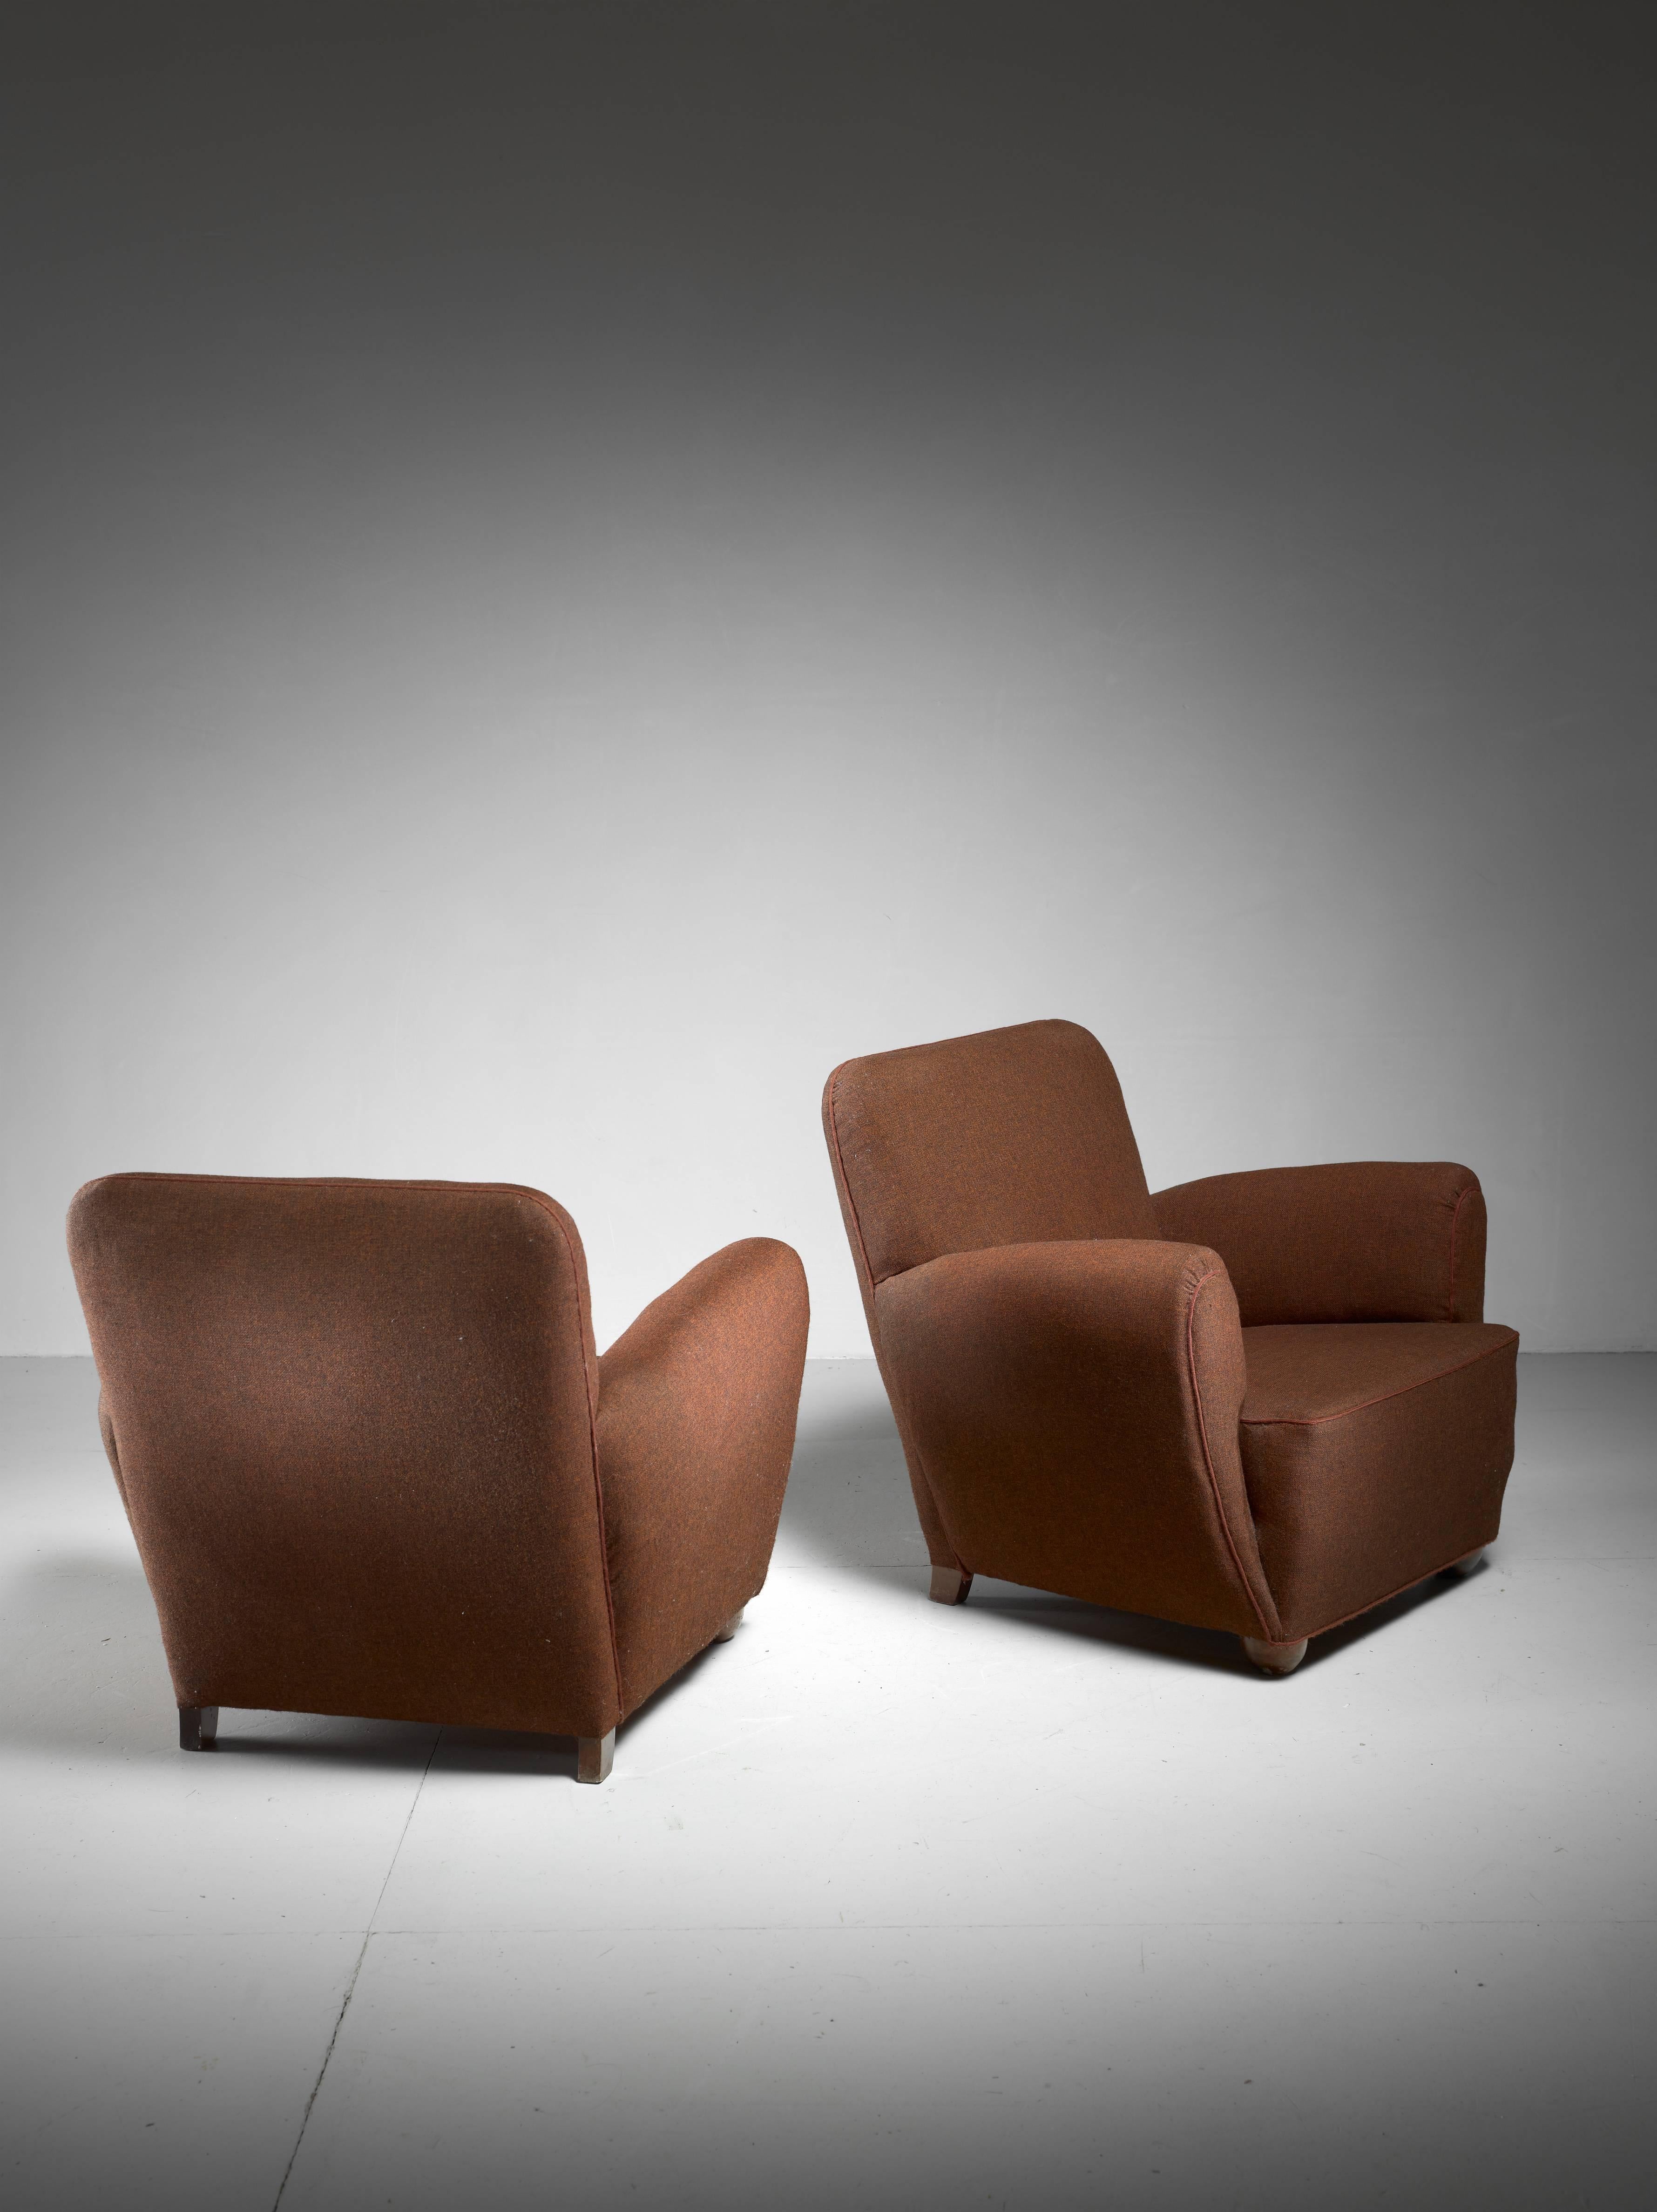 Scandinavian Modern Pair of Danish Lounge Chairs with Brown Upholstery, 1940s